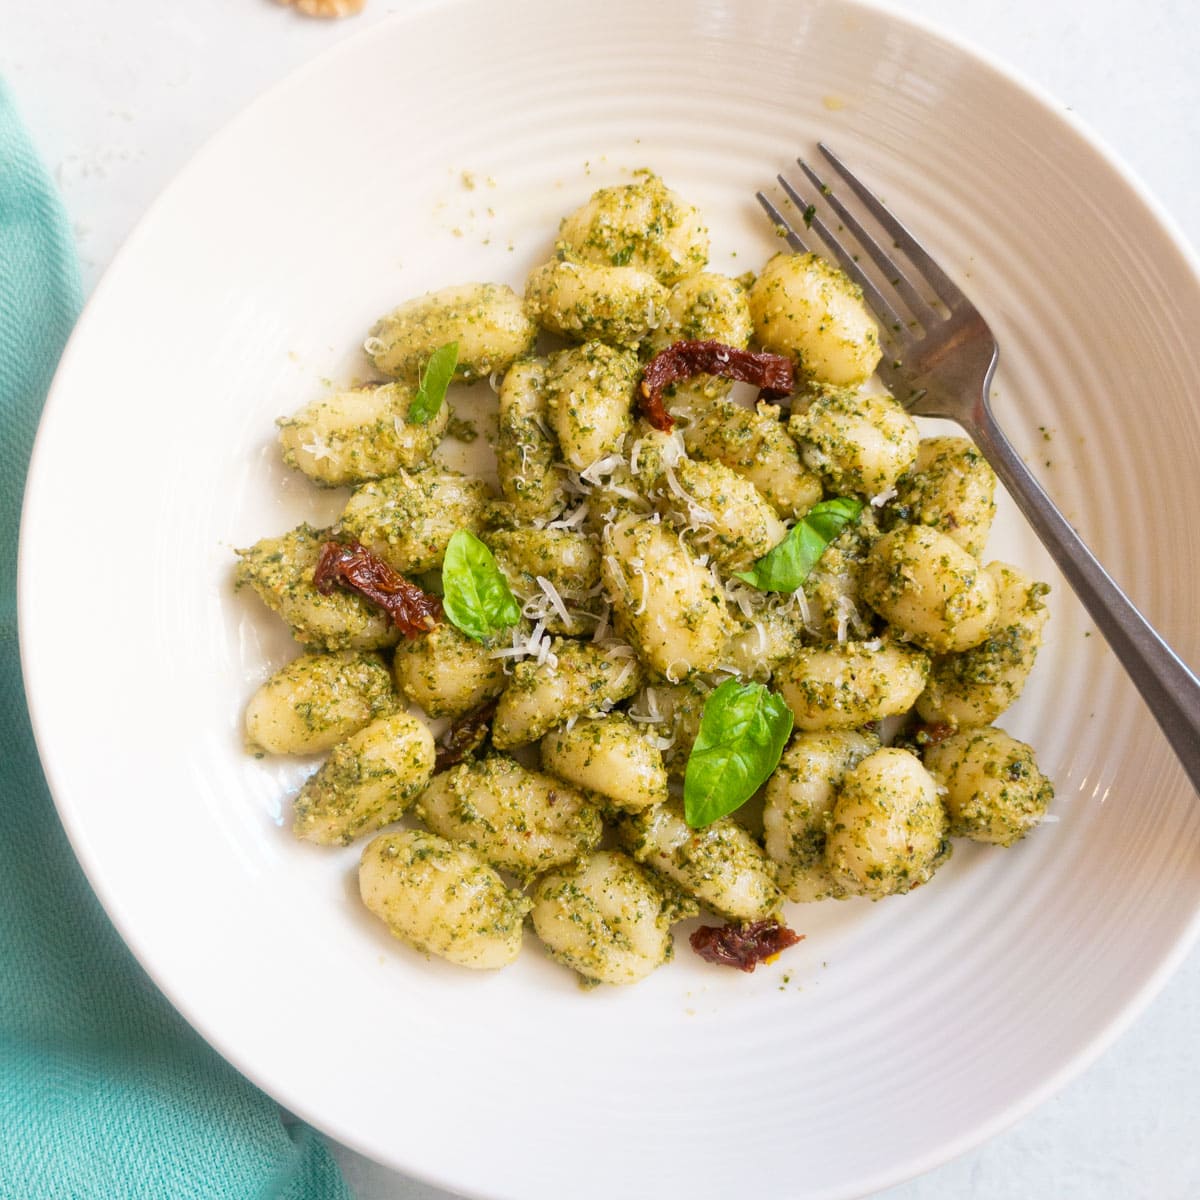 pesto Gnocchi in a white plate garnished with basil leaves and parmesan cheese